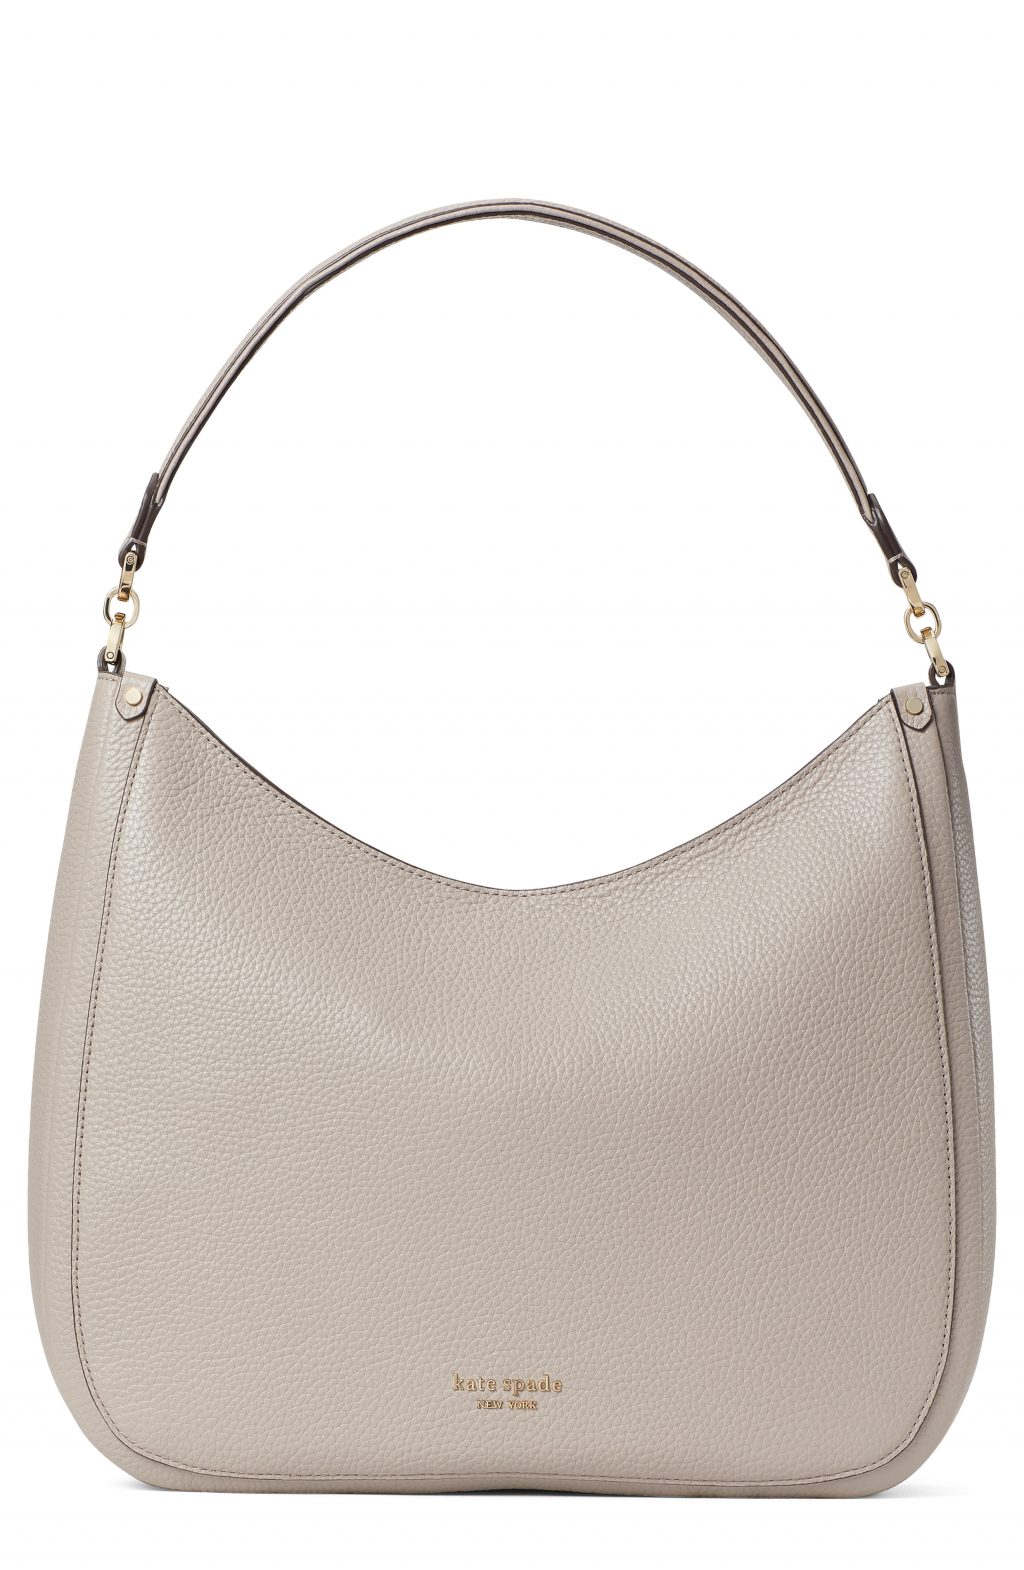 Kate Spade New York Roulette Large Leather Hobo Bag - Beige | Fashion ...